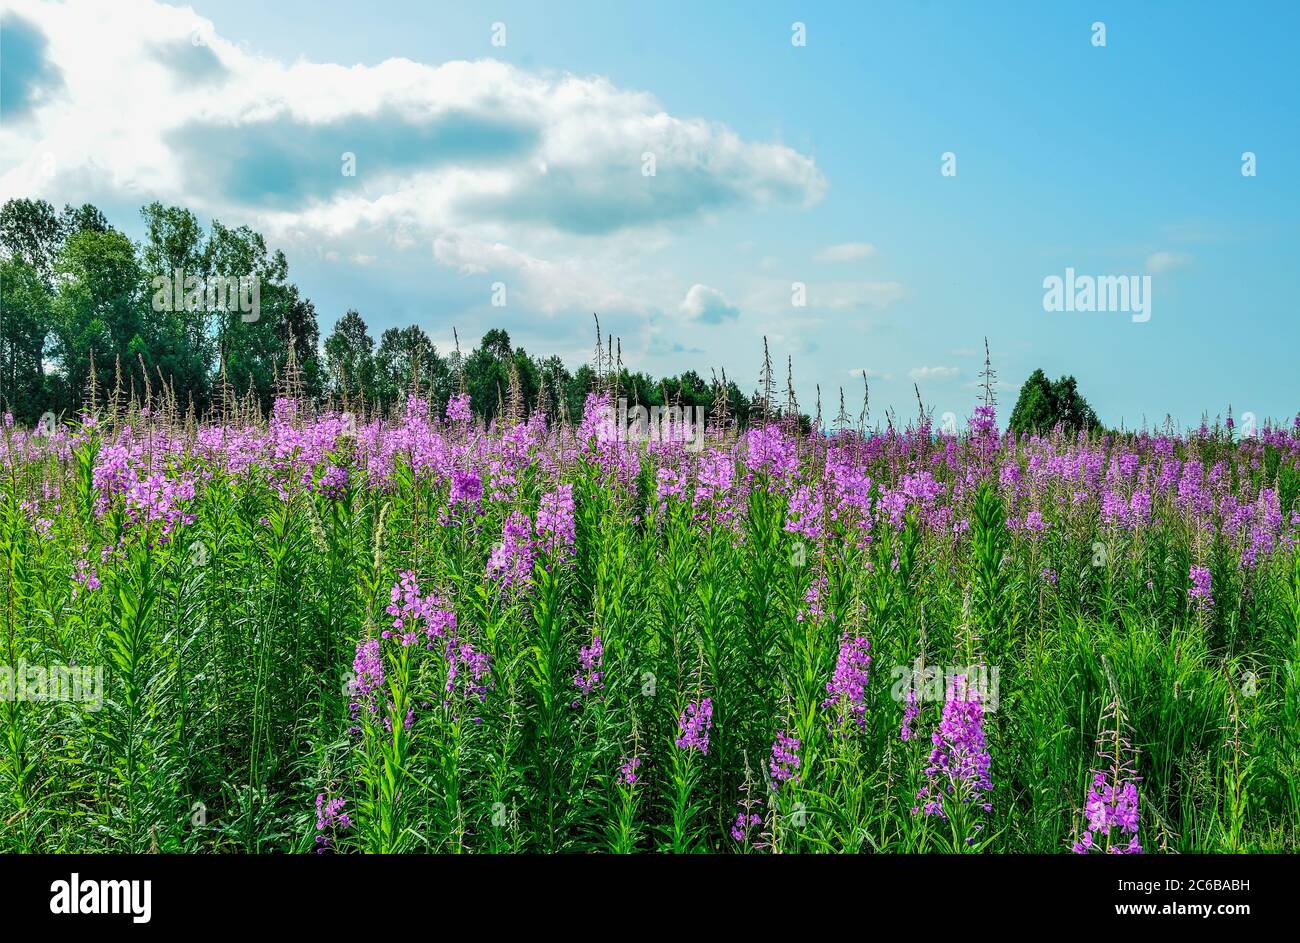 Summer meadow with blossoming pink fireweed flowers covered. Picturesque summer landscape - flowering Chamaenerion angustifolium or Epilobium angustif Stock Photo